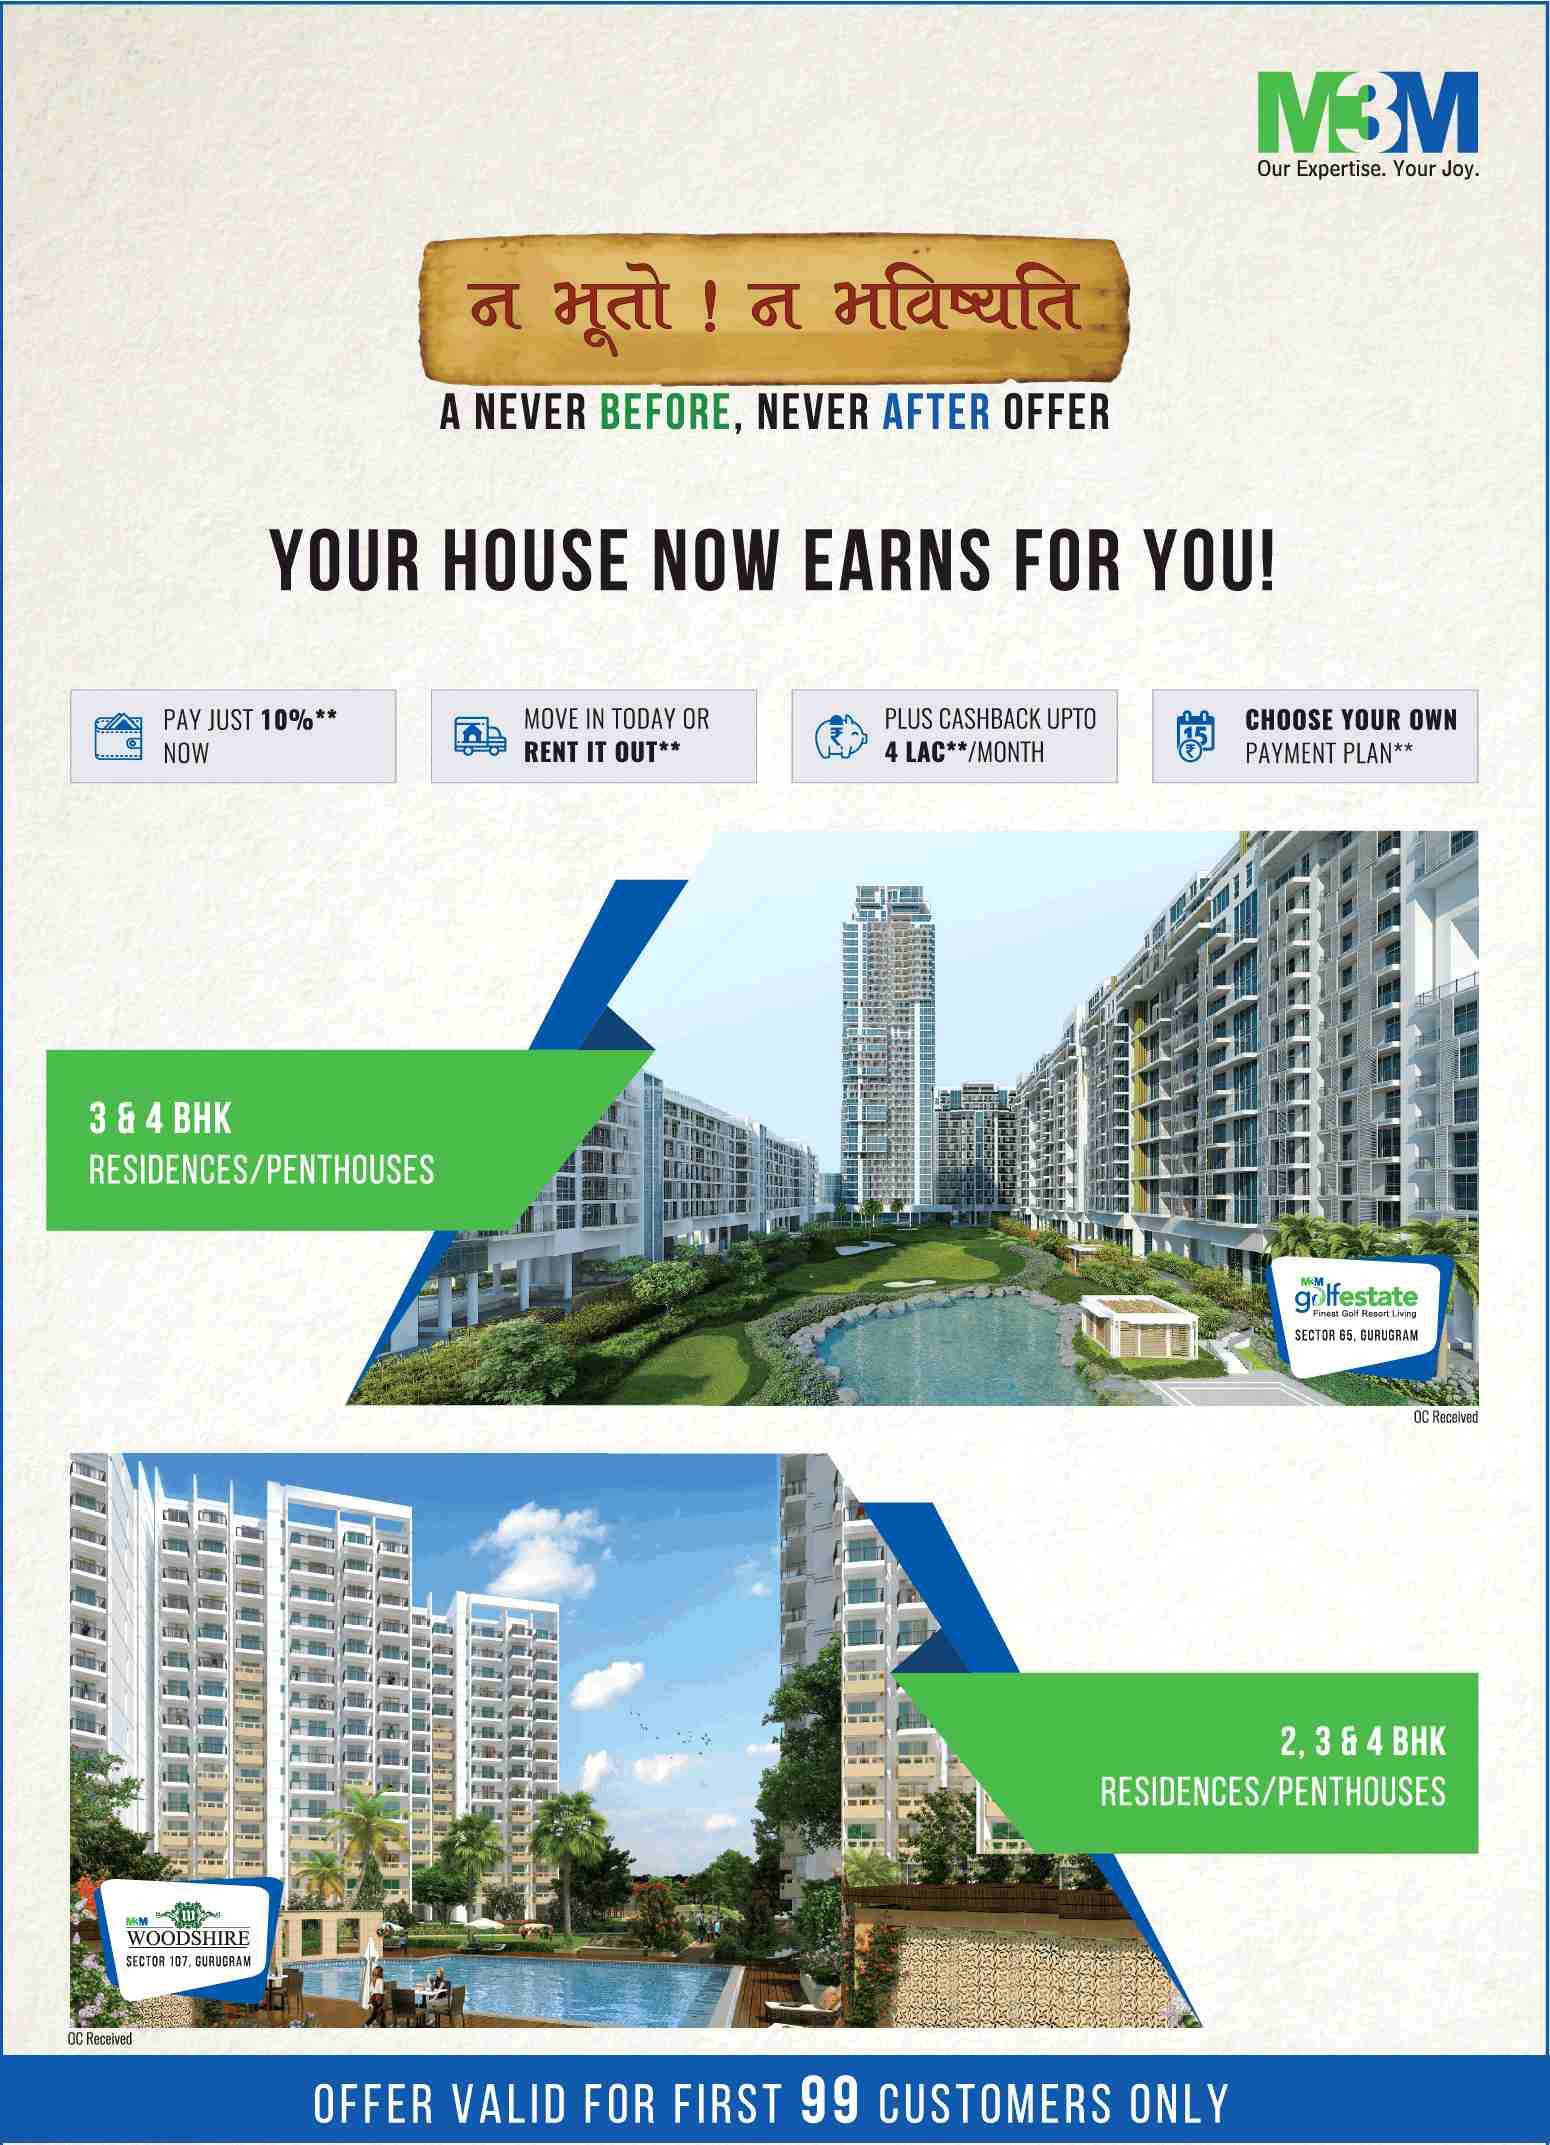 Pay just 10% and move in now & get rent and cashback upto 4 Lakhs a month at M3M projects, Gurgaon